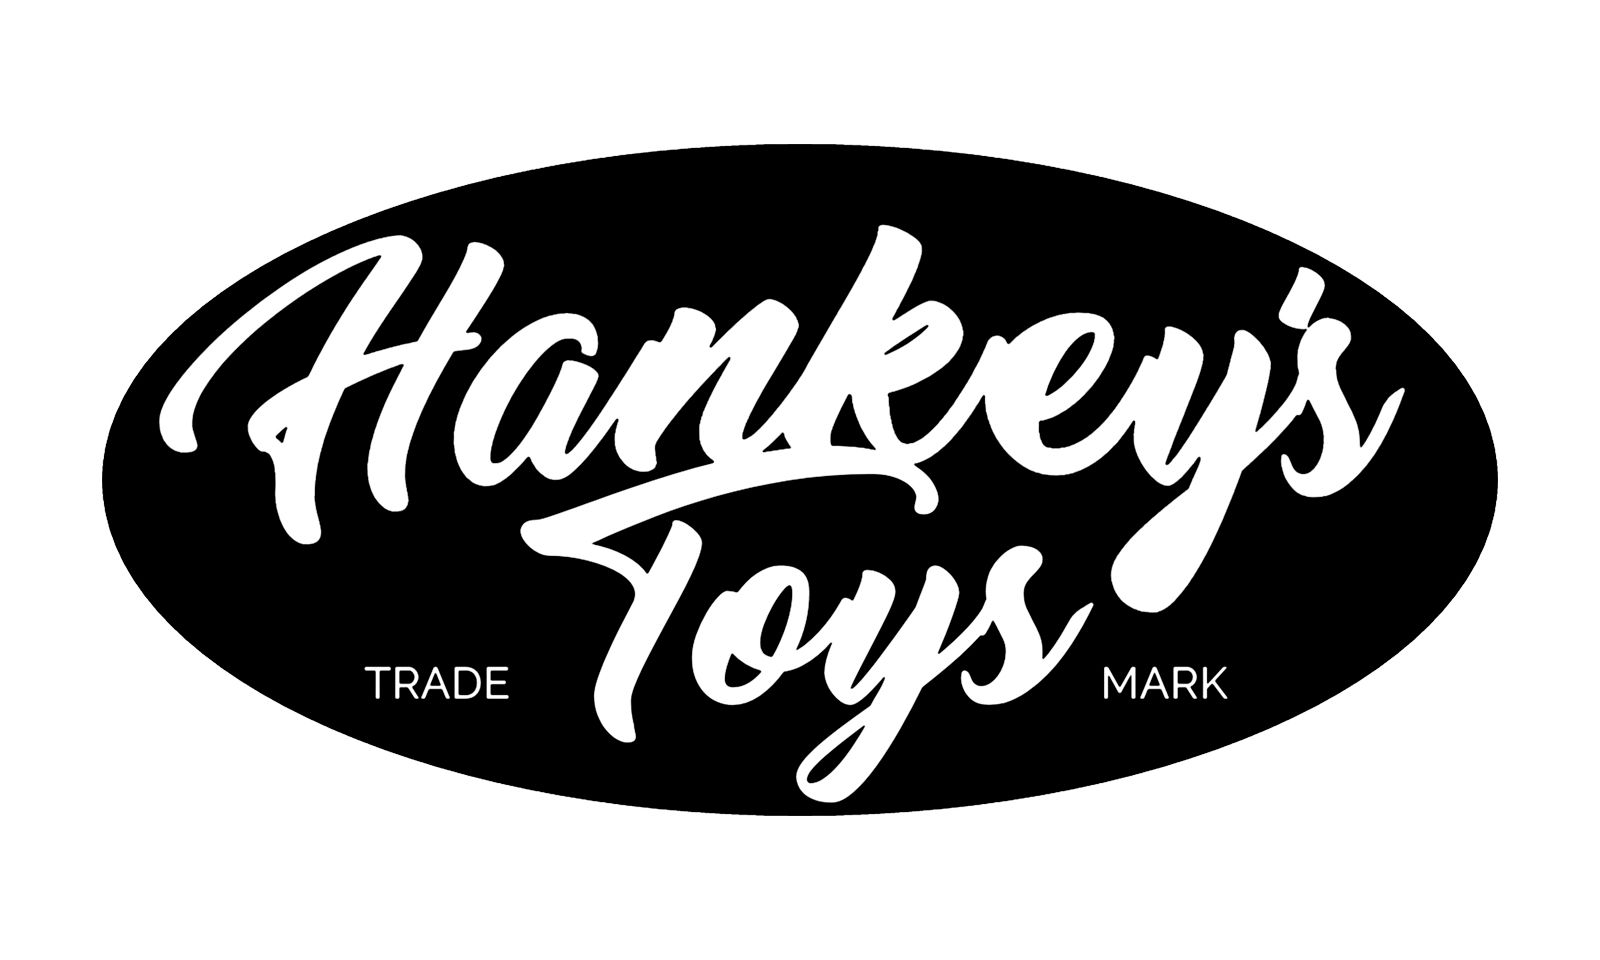 Mr. Hankey's Toys Debuts Topher Michels Dongs in 4 sizes